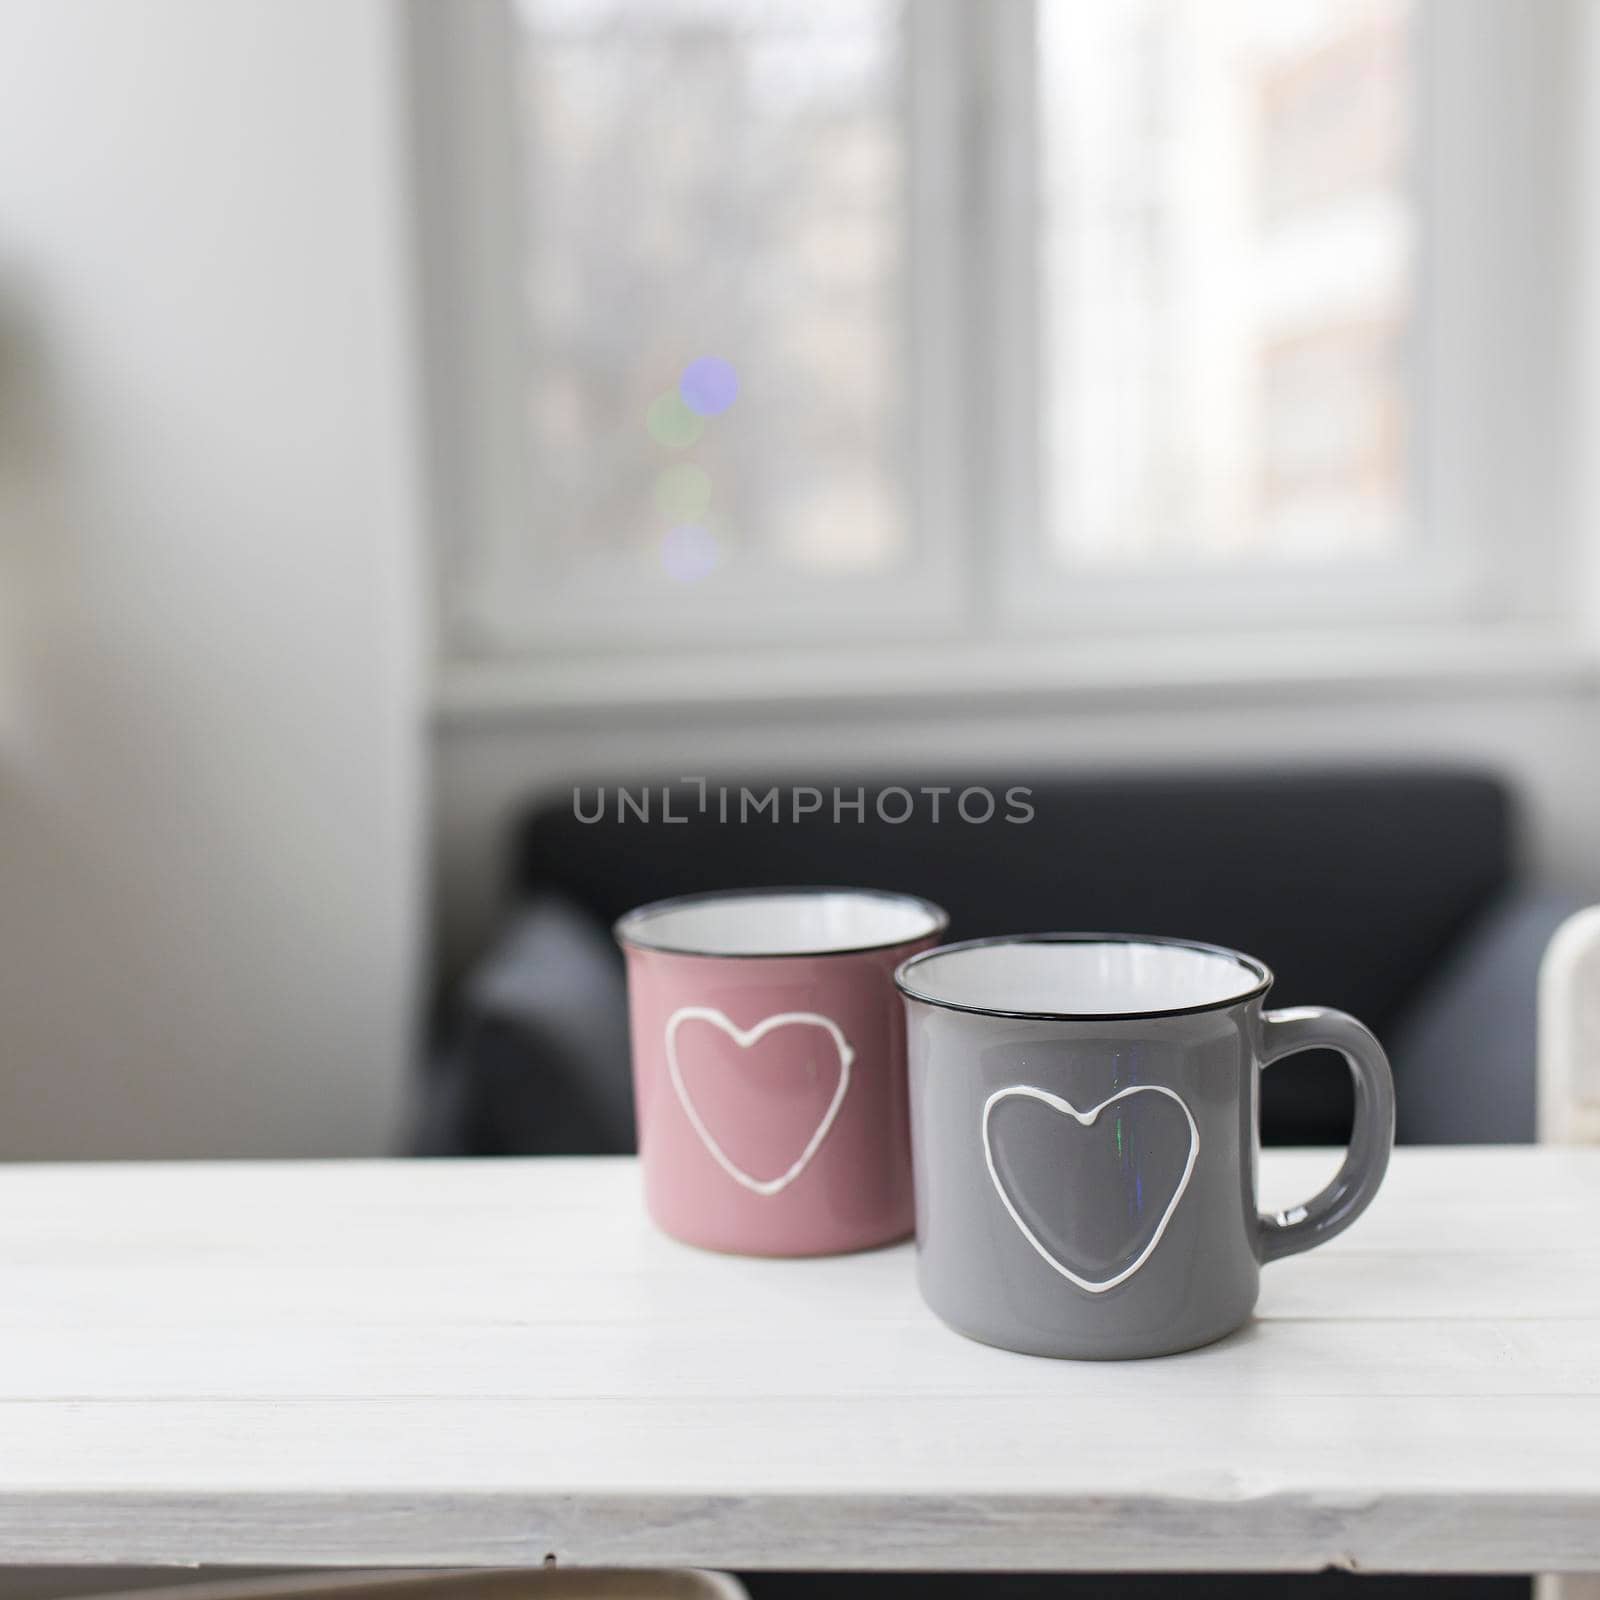 Gray and pink with hearts enamel cups sit on the table in front of the window. Valentine's Day. by elenarostunova